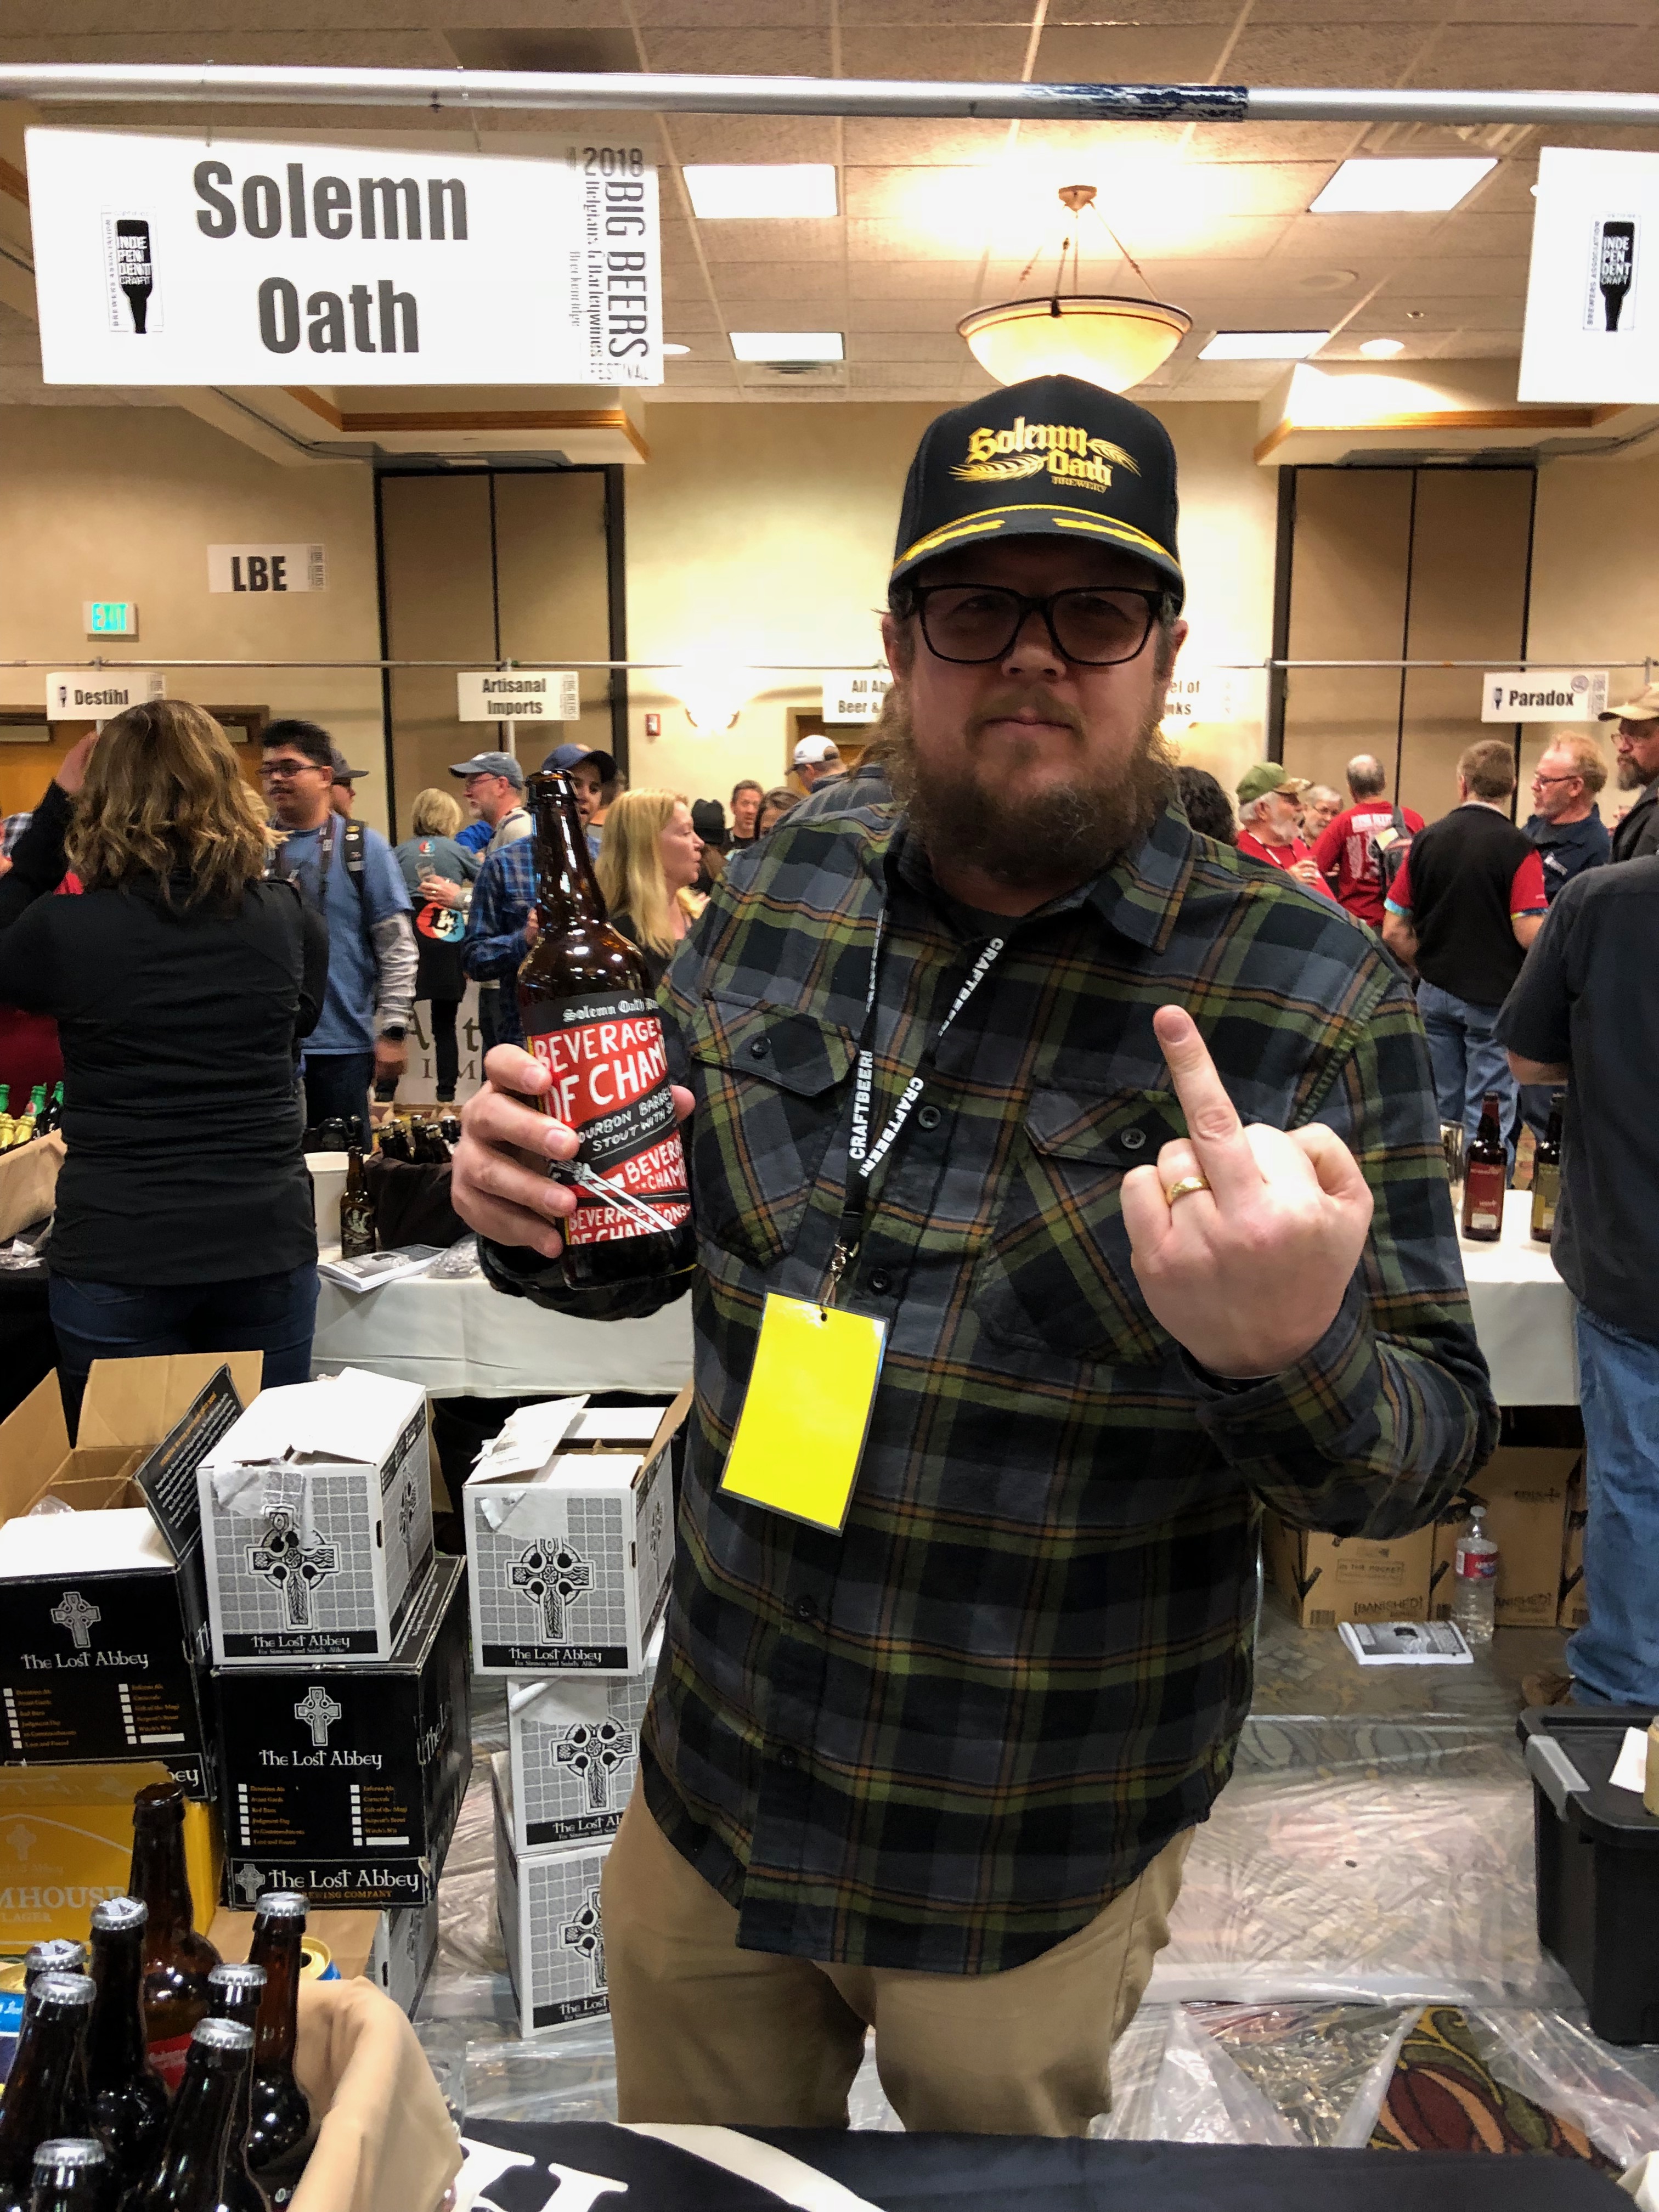 John Barley from Solemn Oath Brewery pouring at the 2018 Big Beers, Belgians & Barleywines Festival.